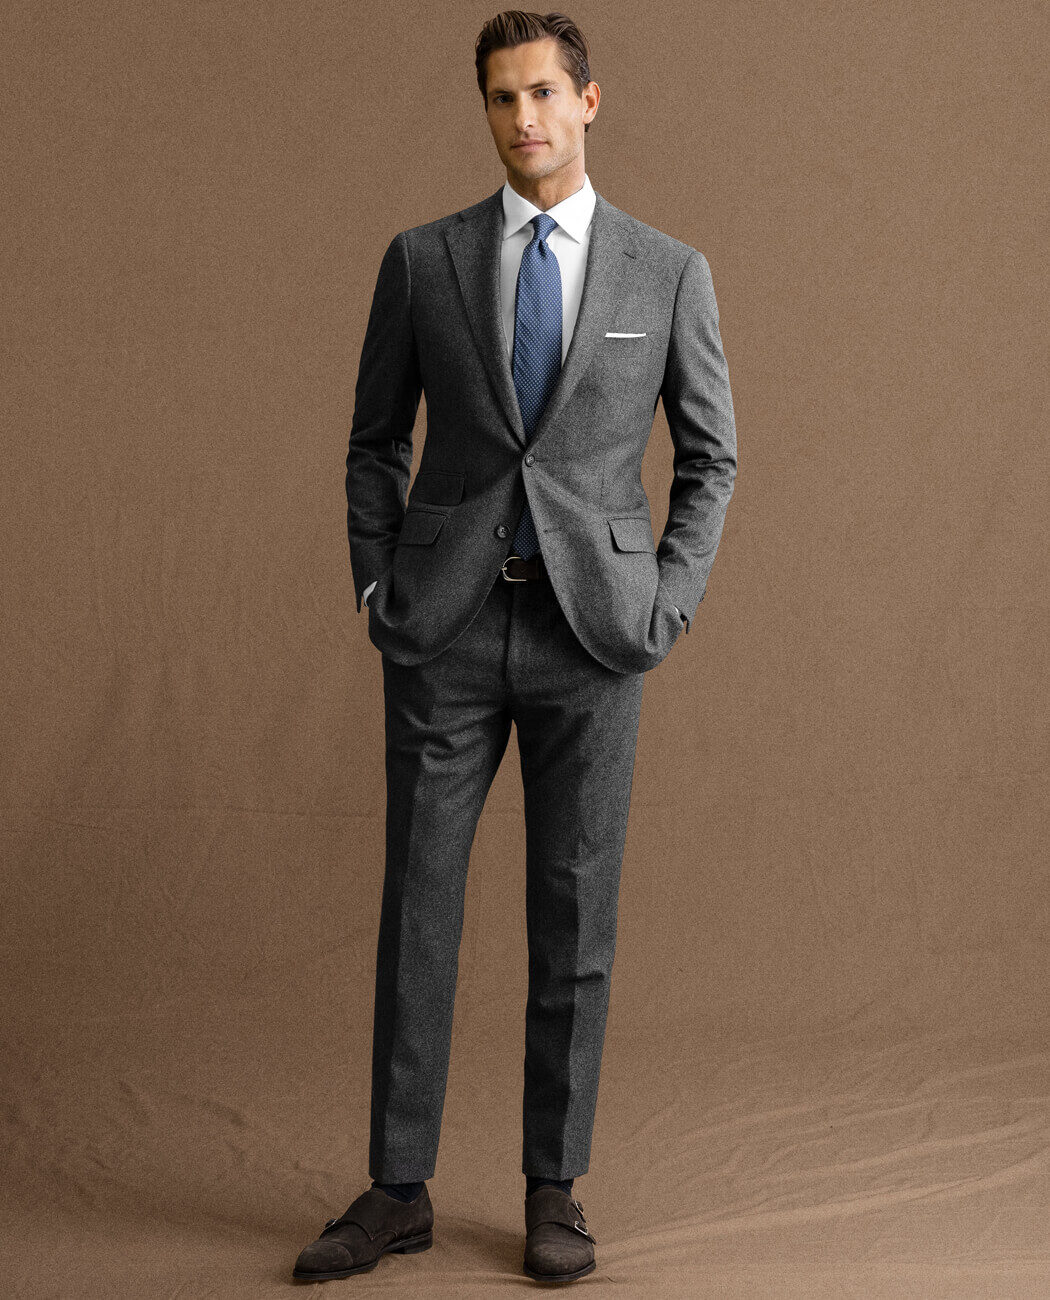 Look: The Wool Flannel Suit